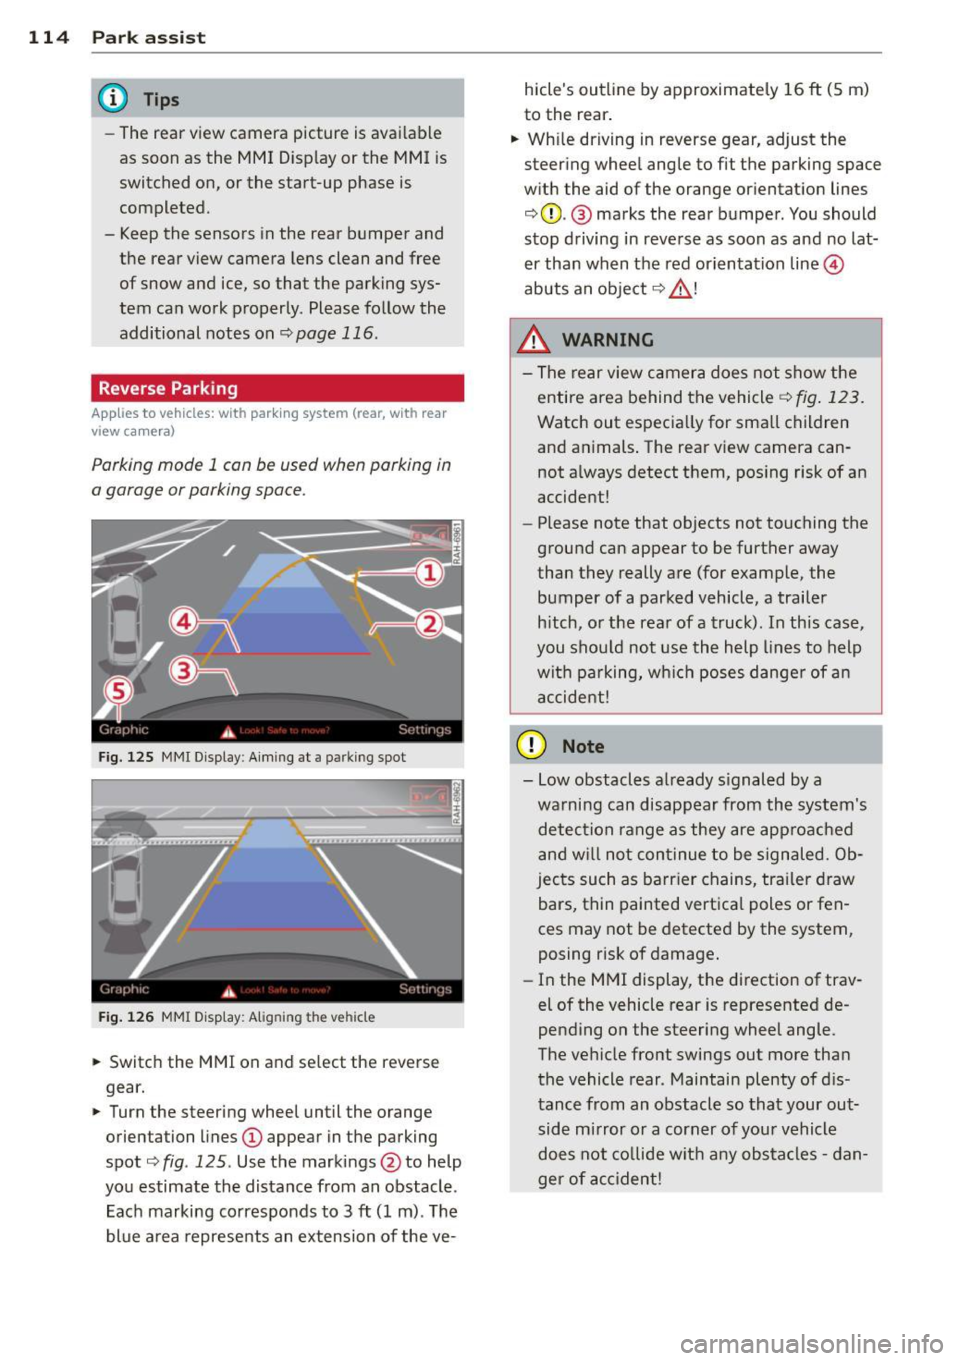 AUDI A5 CABRIOLET 2013  Owners Manual 114  Park assist 
@ Tips 
-The  rear  view camera  picture  is available 
as  soon  as  the  MMI Display or  the  MMI  is 
switched  on,  or  the  start-up phase is 
completed. 
- Keep the  sensors in